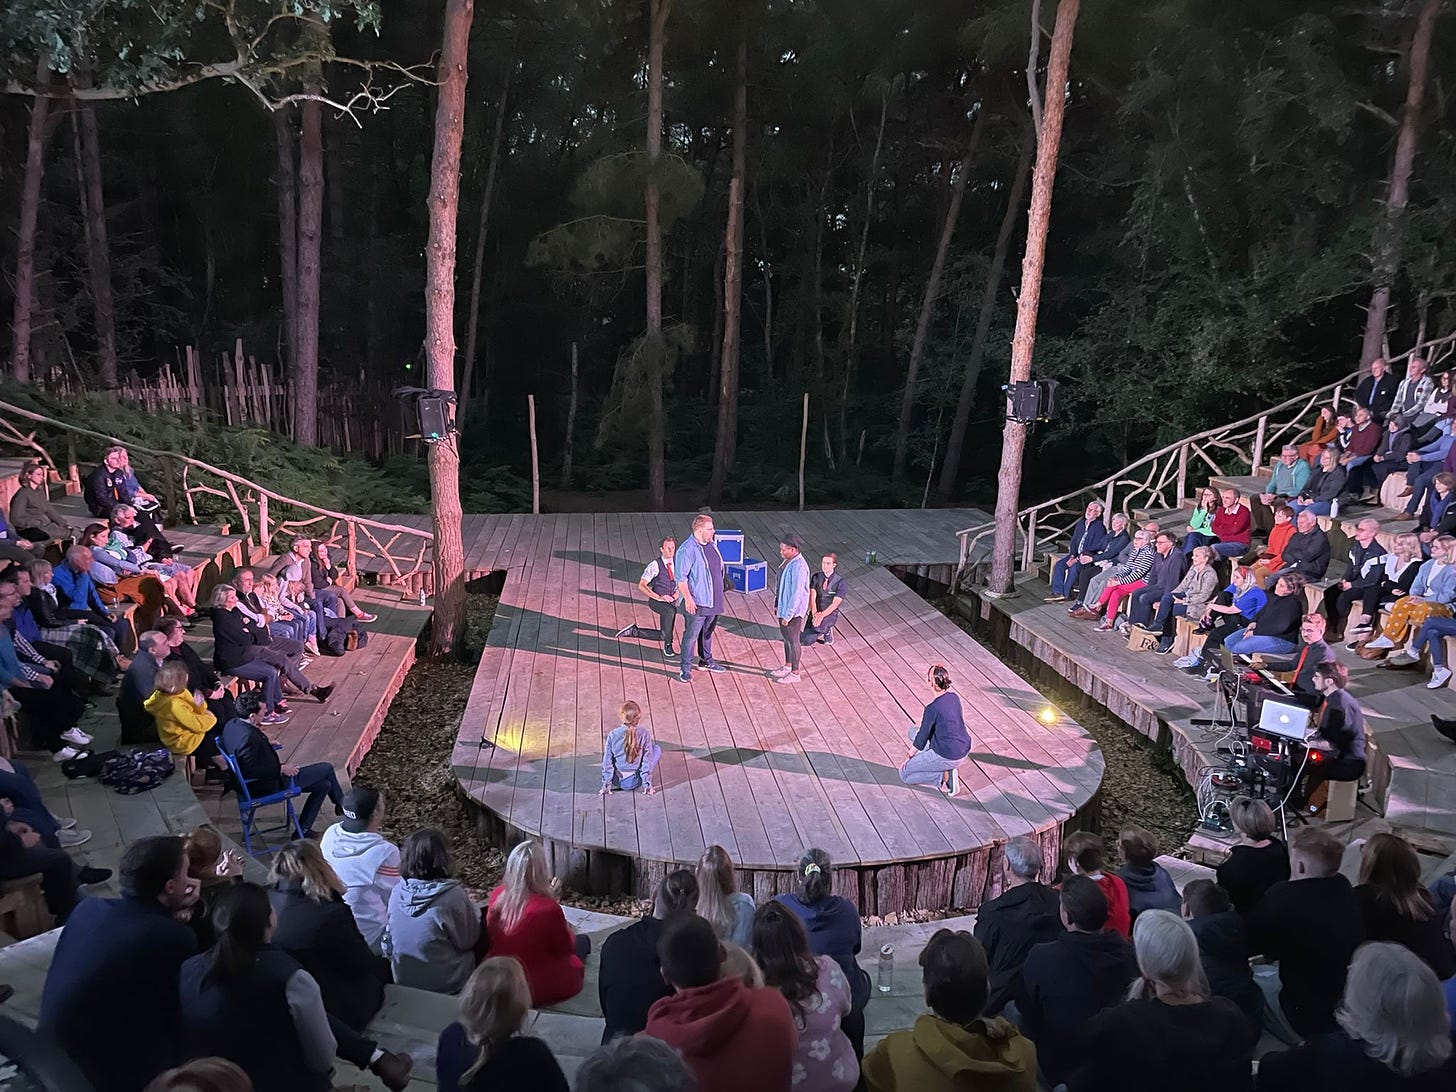 A circular wooden stage in a forest with performers on it mid show. An audience are seated watching